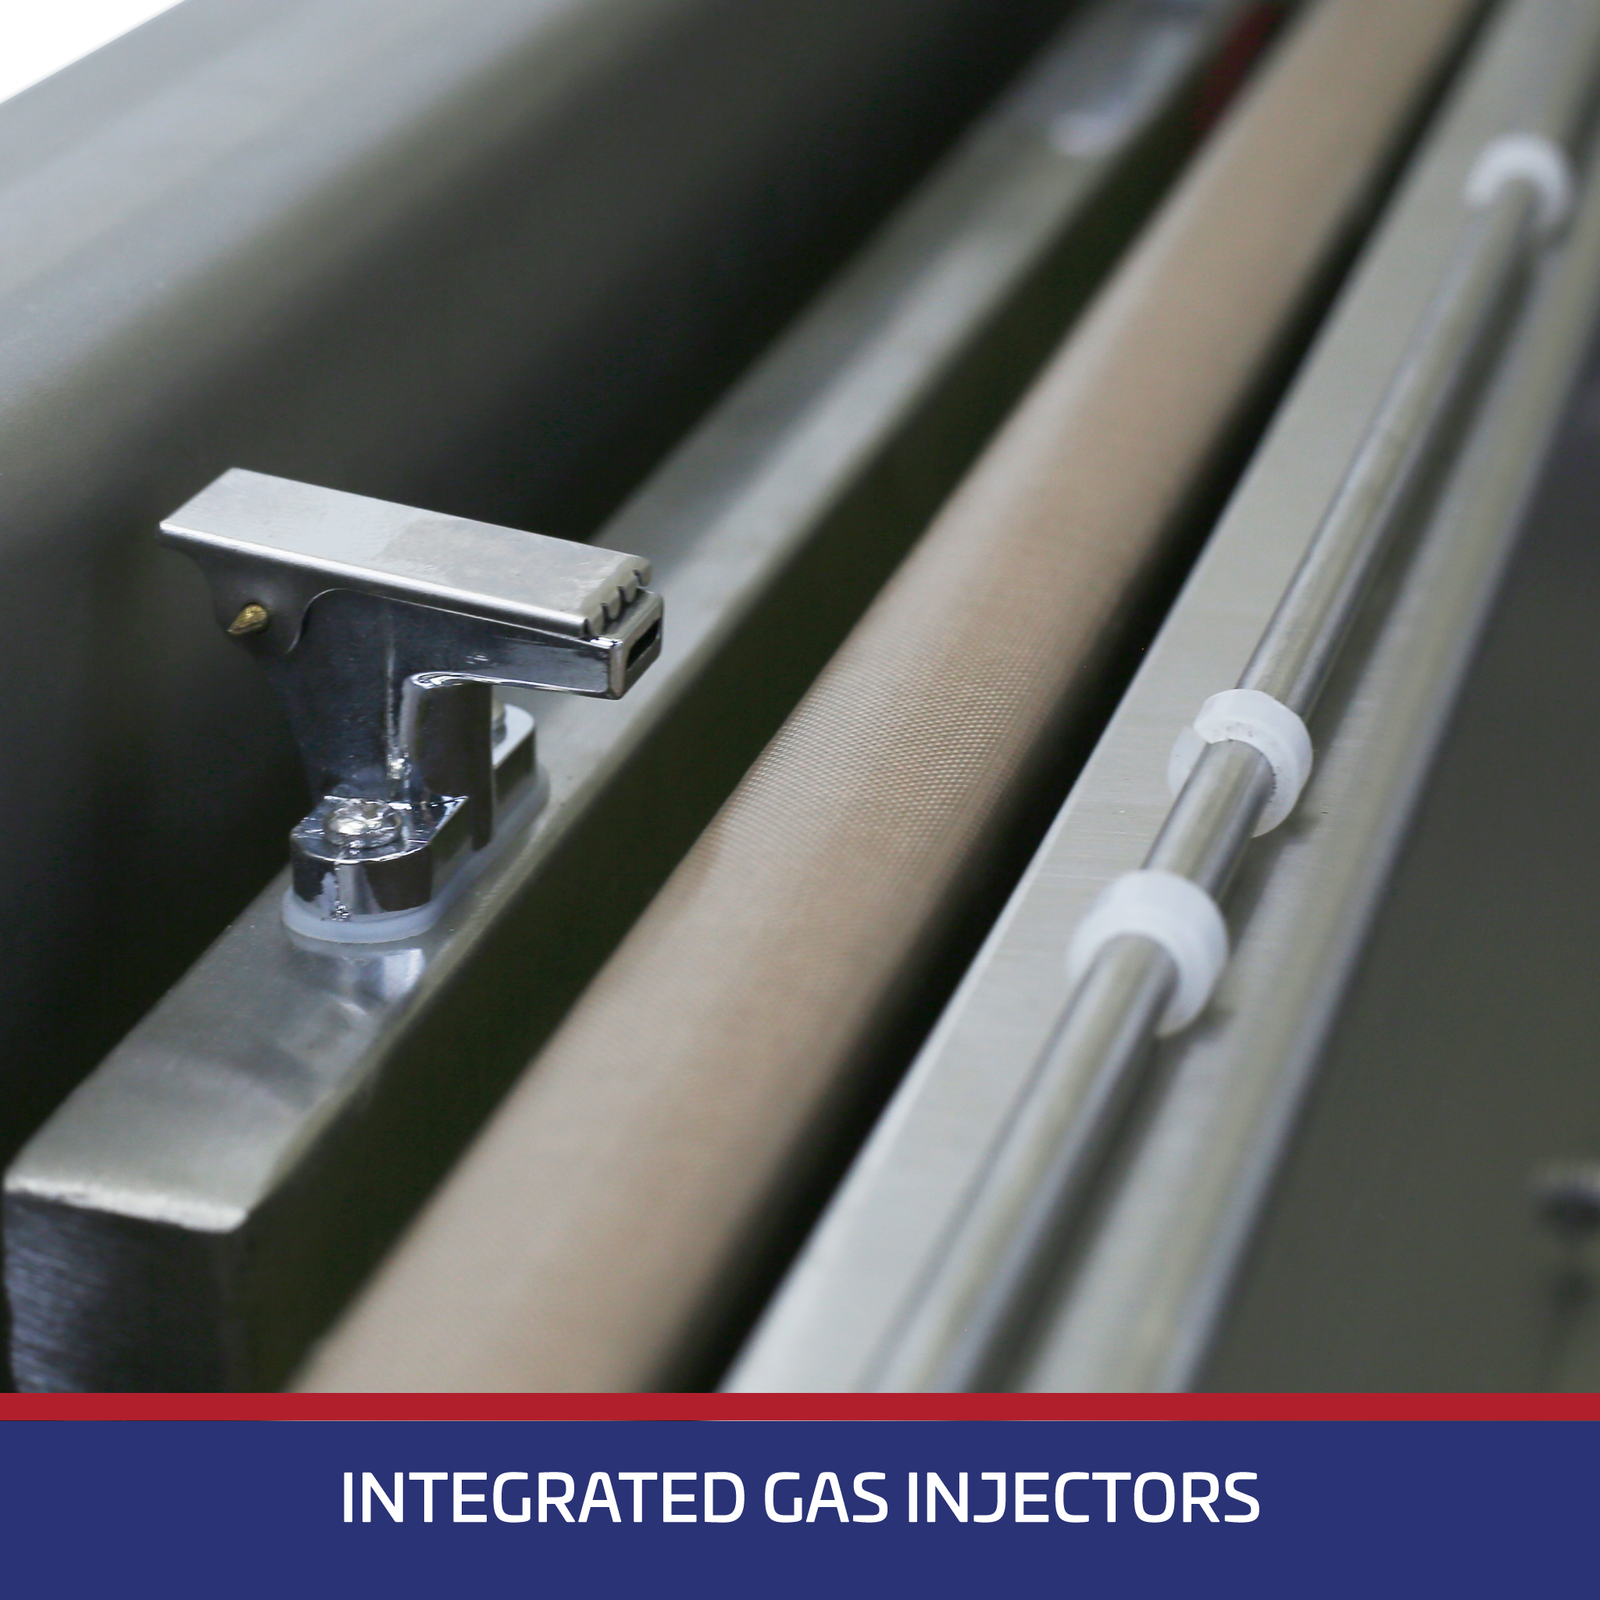 Close of the heating element and the integrated gas injector of the JORES TECHNOLOGIES® tabletop vacuum sealer. A blue banner reads Integrated gas injectors